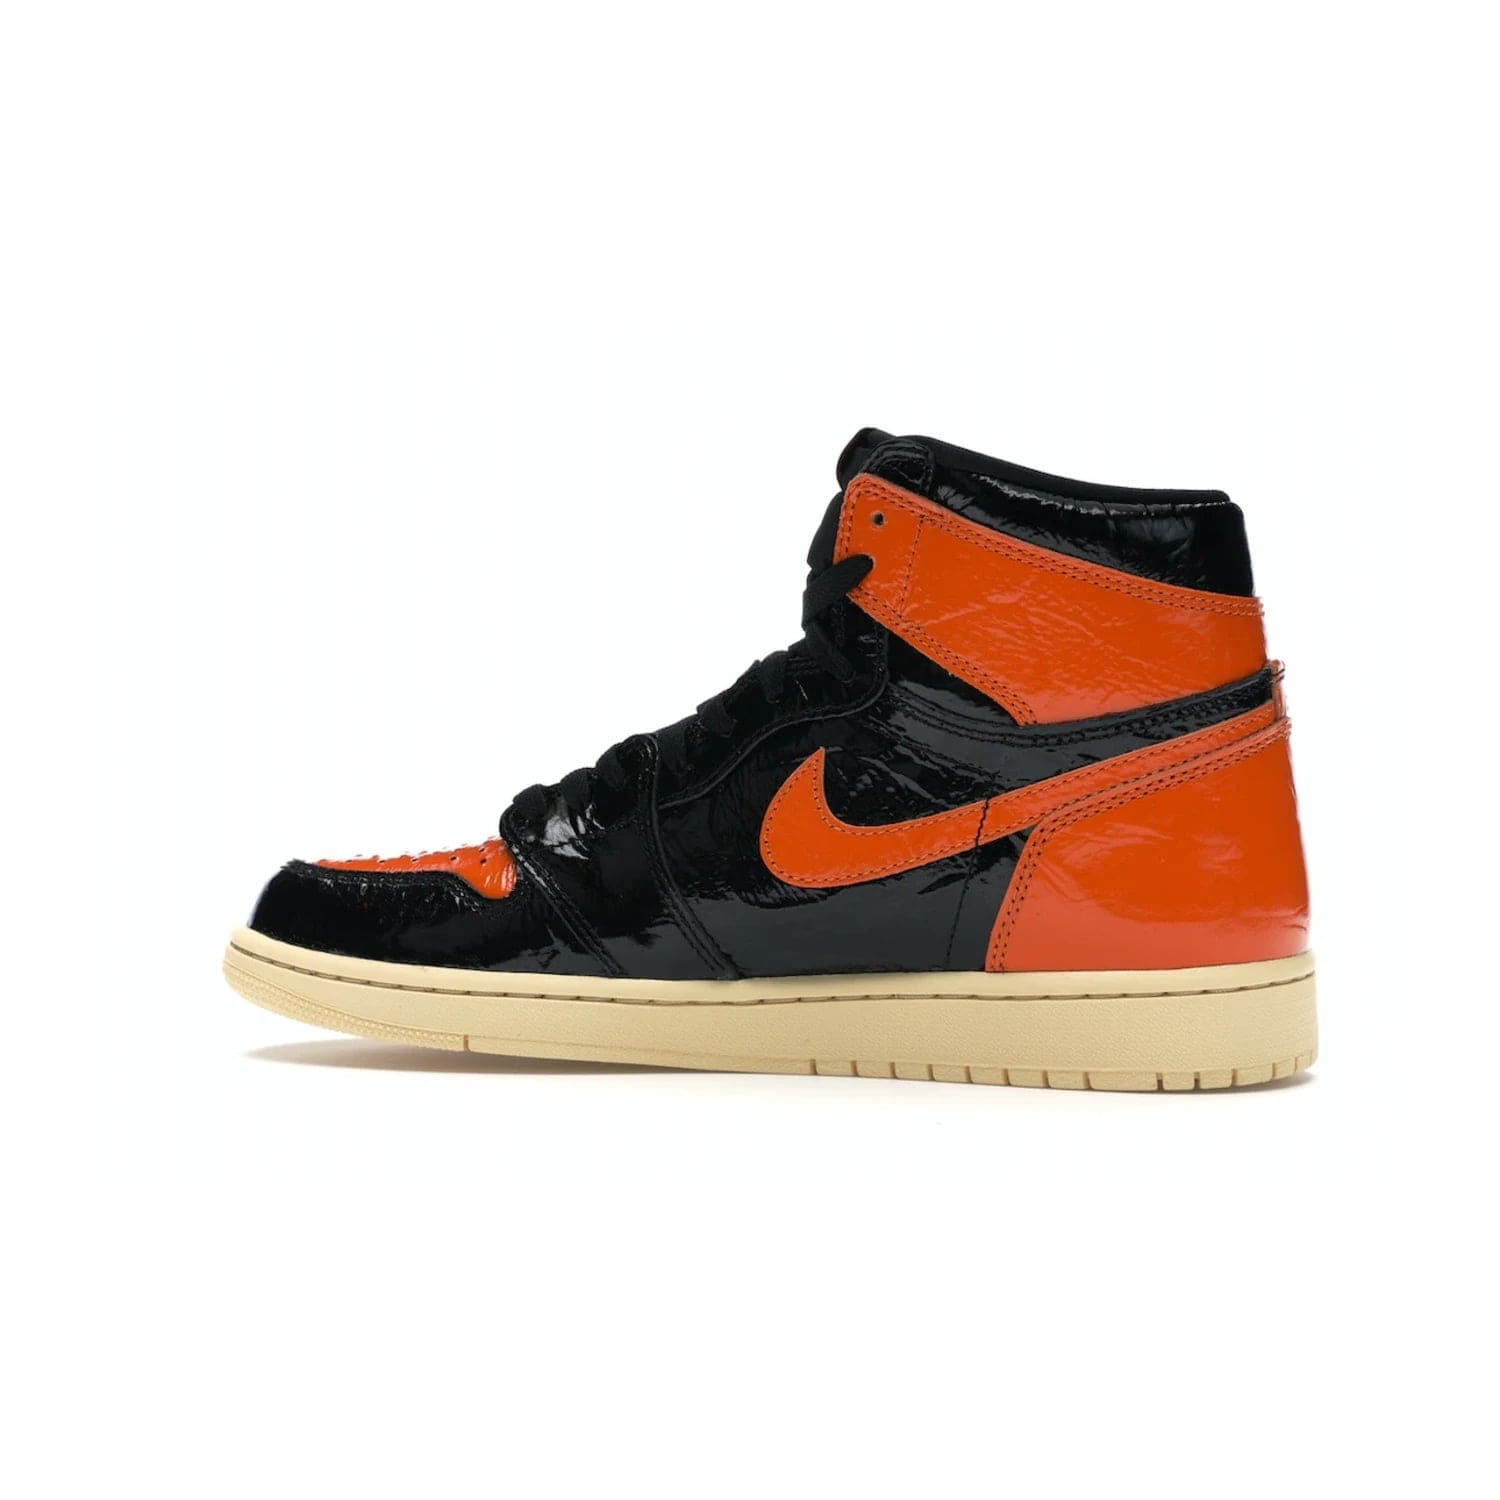 Jordan 1 Retro High Shattered Backboard 3.0 - Image 21 - Only at www.BallersClubKickz.com - #
Jordan 1 Retro High Shattered Backboard 3.0: the perfect blend of modern style and nostalgic flair featuring an orange and black crinkled patent leather upper and yellowed vanilla outsole. Get these exclusive sneakers released in October of 2019!